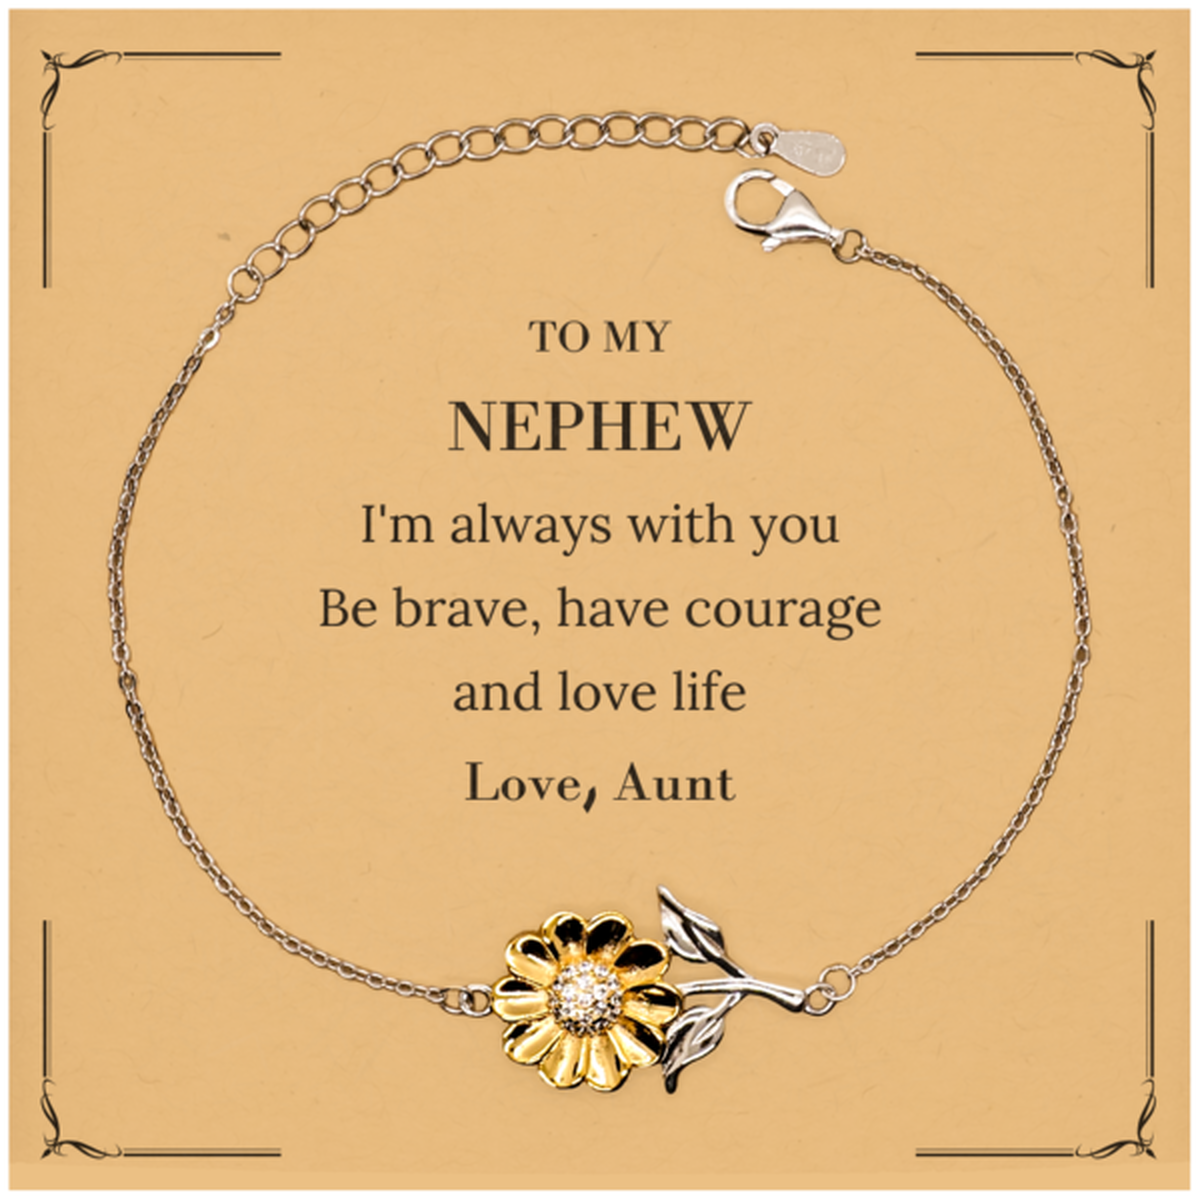 To My Nephew Gifts from Aunt, Unique Sunflower Bracelet Inspirational Christmas Birthday Graduation Gifts for Nephew I'm always with you. Be brave, have courage and love life. Love, Aunt